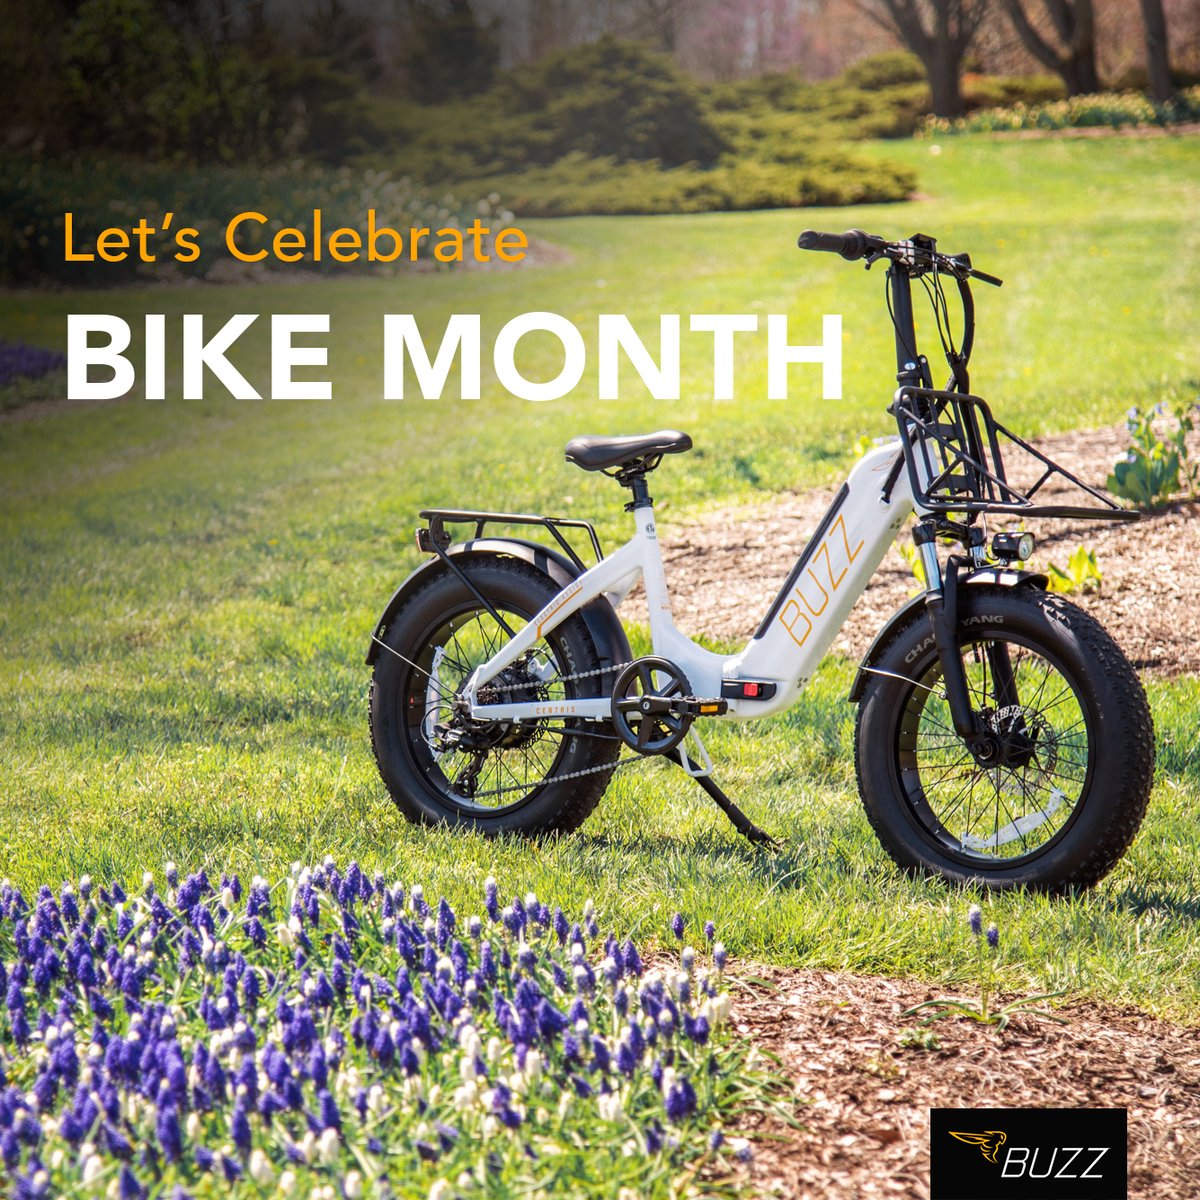 May Bike Month has arrived! 🤗 Make sure to get out and enjoy nature on your Buzz! ☀️ Stay tuned all month long for deals on your next ride!  

#BuzzThroughLife #MayBikeMonth #BikeMonth #Ebike